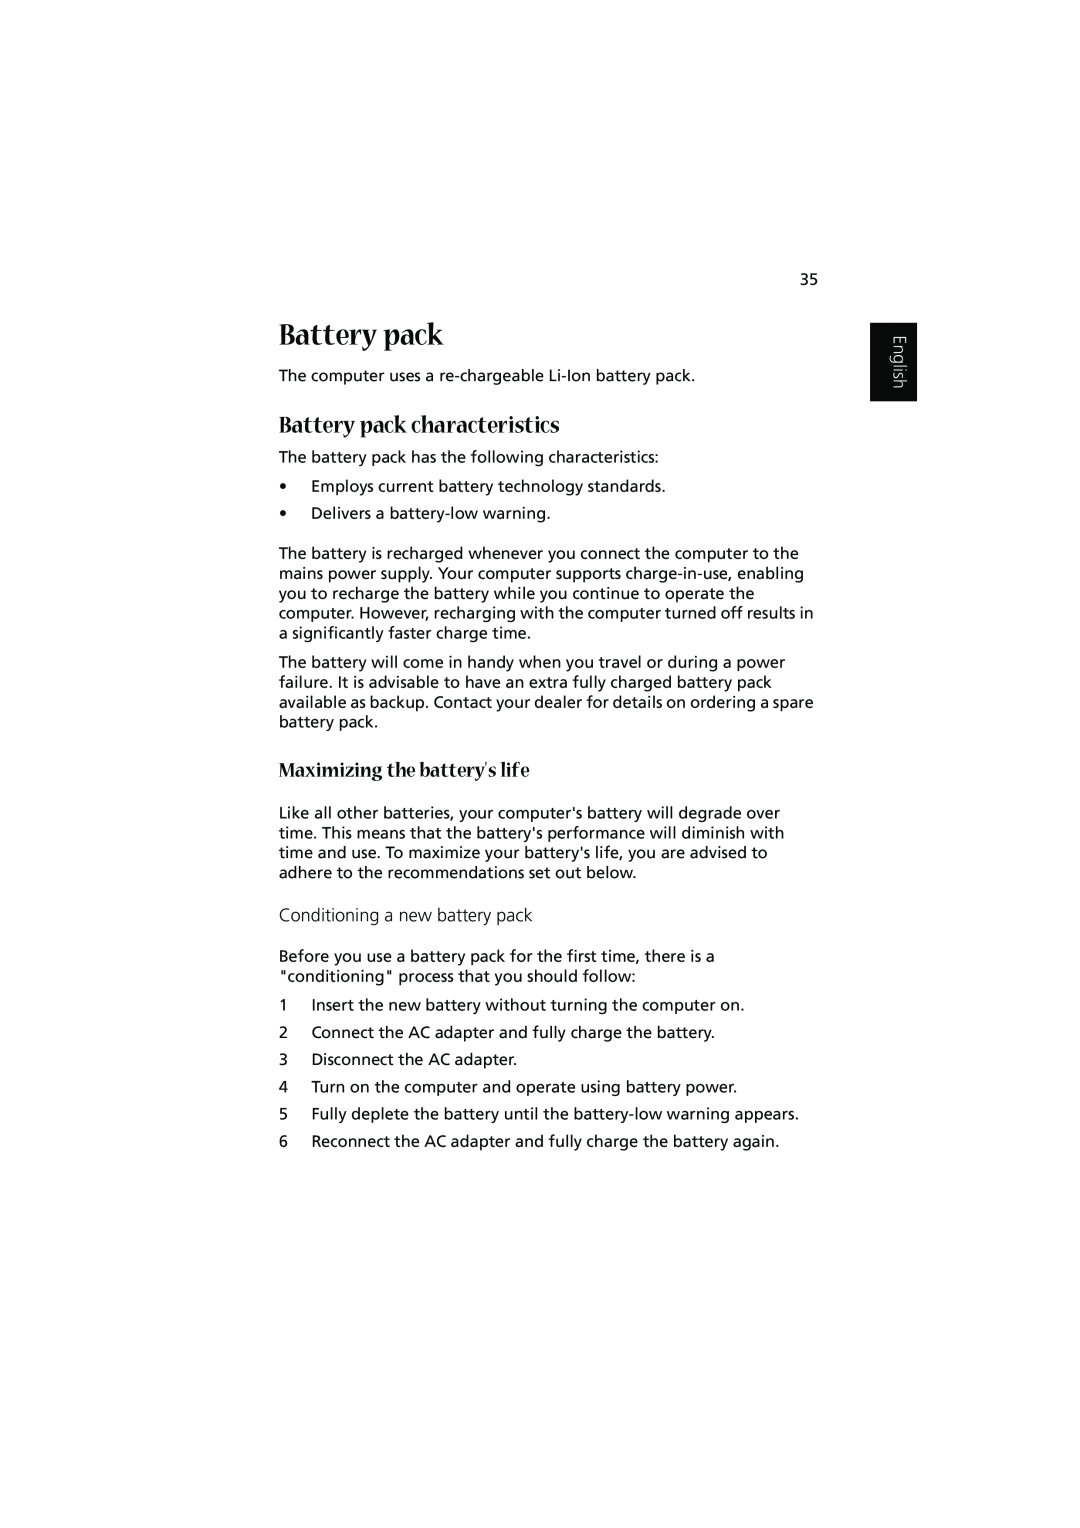 Acer 1450 manual Battery pack characteristics, Maximizing the batterys life, Conditioning a new battery pack, English 